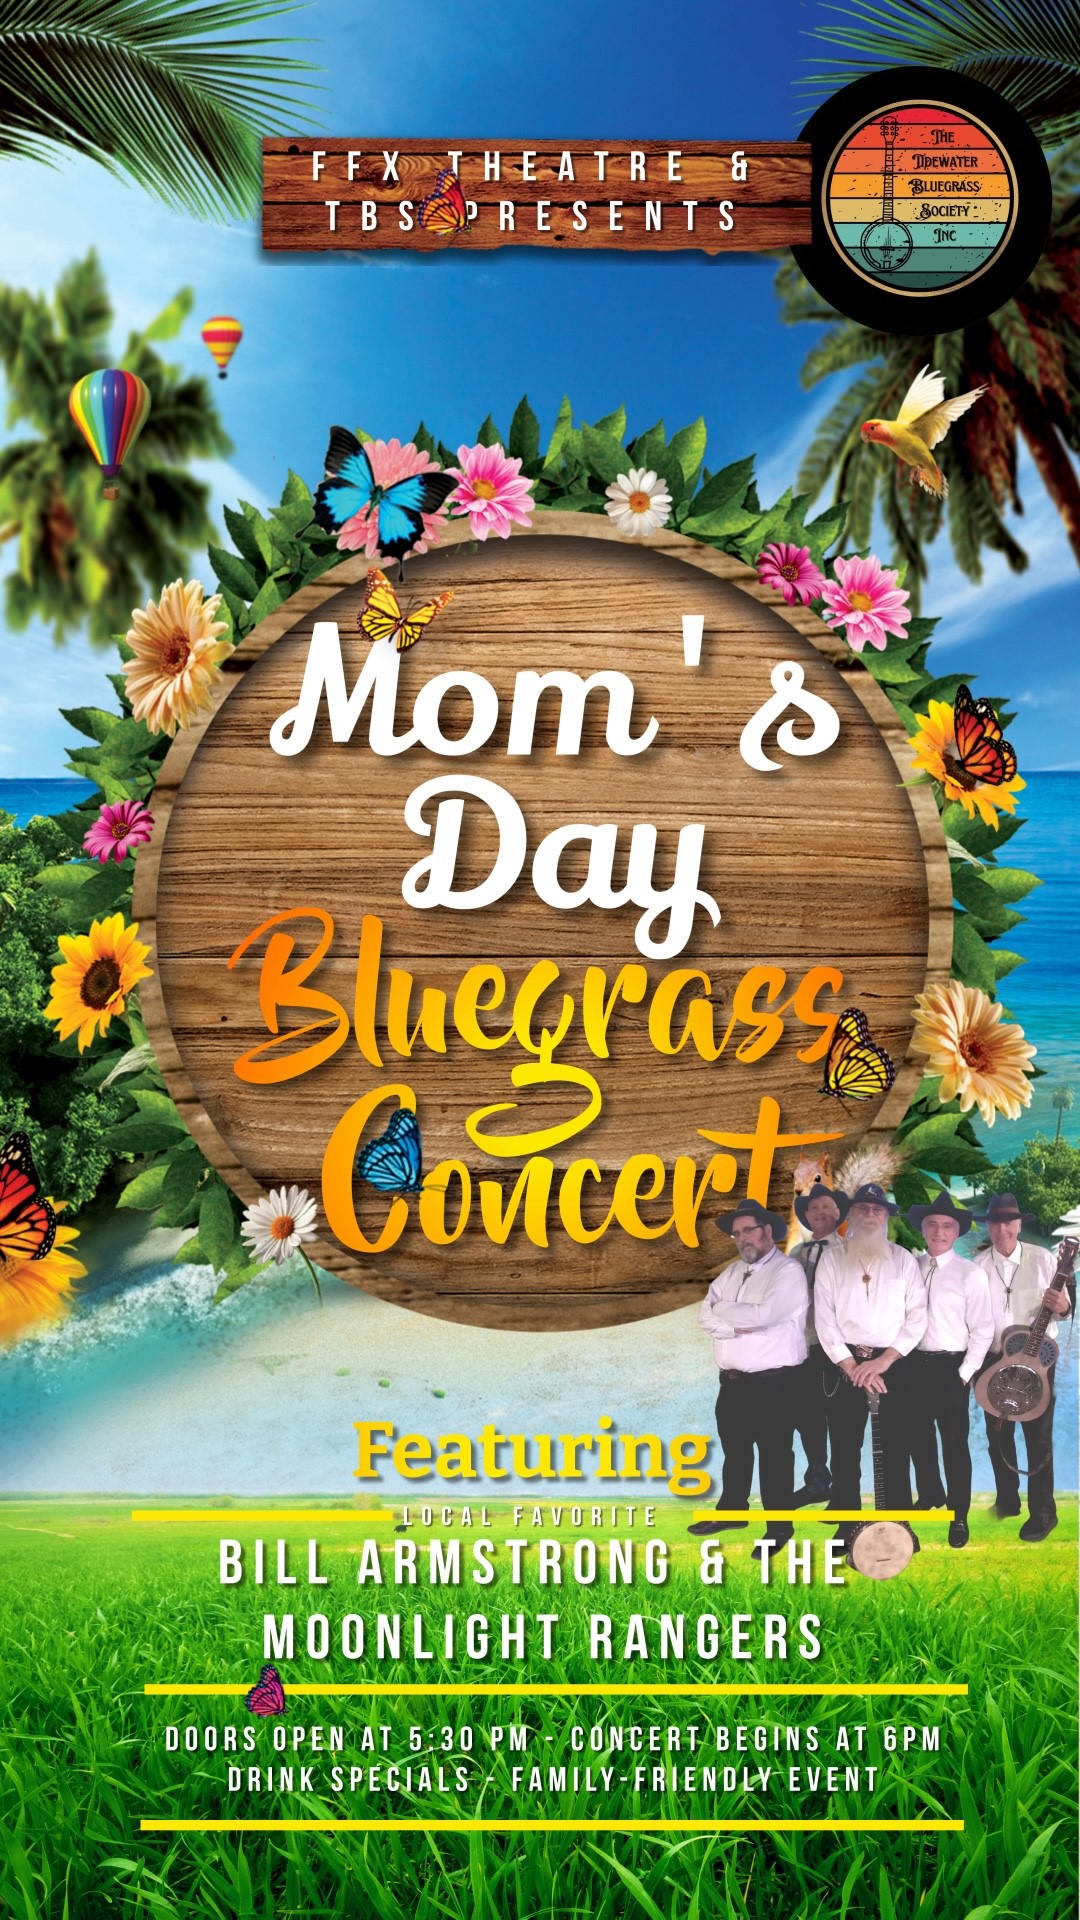 Bluegrass Concert for Mom's Day! FEATURING BILL ARMSTRONG & THE MOONLIGHT RANGERS on may. 12, 18:00@FFX Theatre - Compra entradas y obtén información enFamily Fun Xperience tickets.ffxshow.org